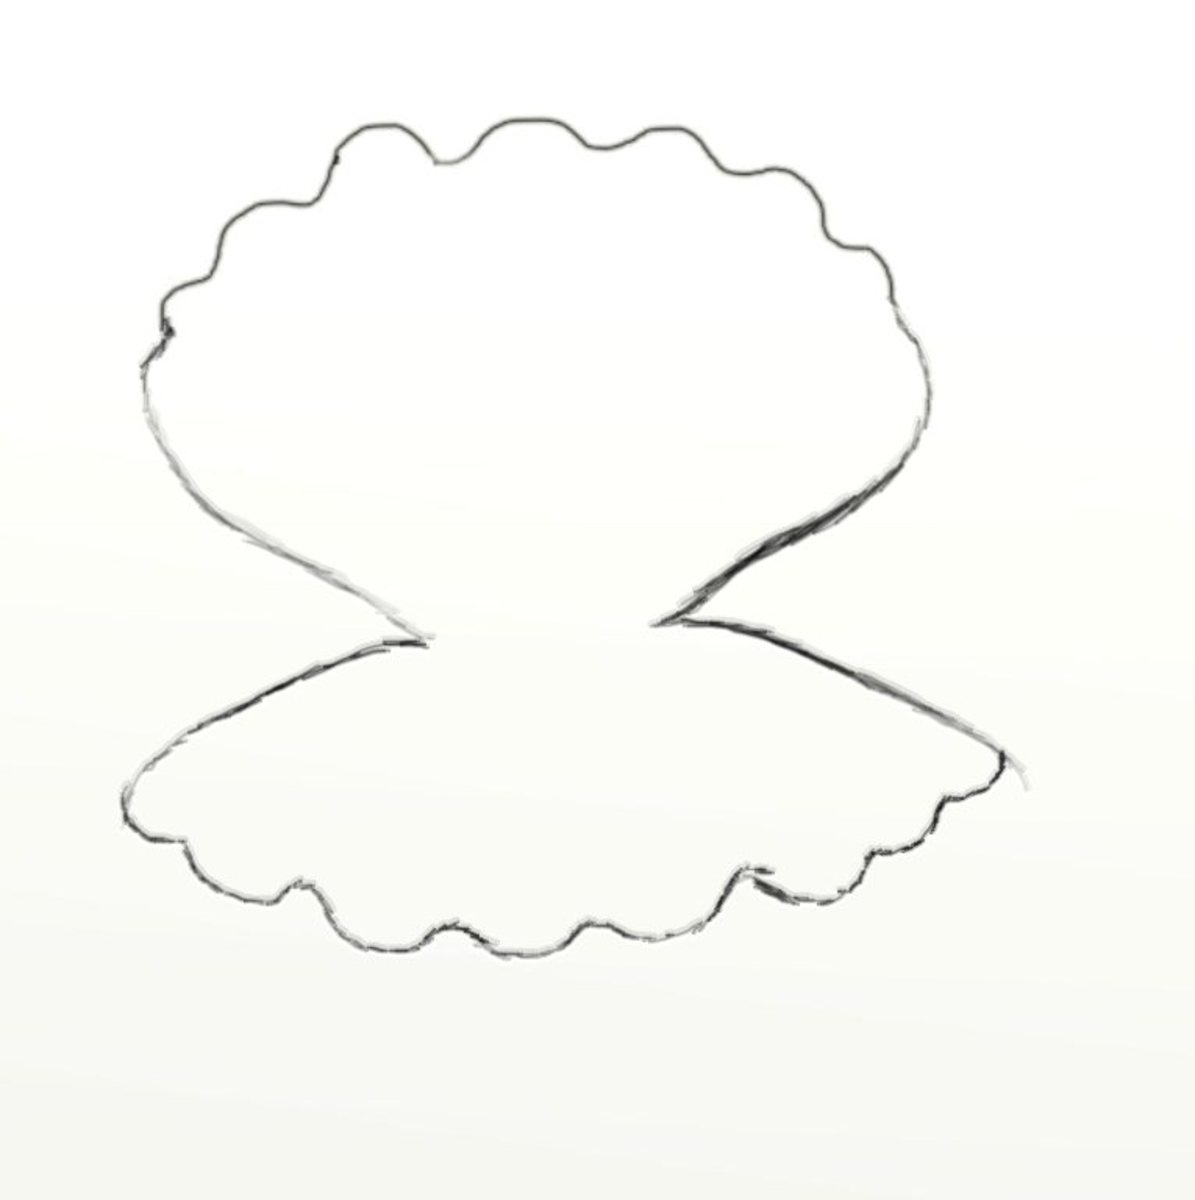 White Conch Symbol - Conch Shell Drawing Easy, HD Png Download ,  Transparent Png Image - PNGitem